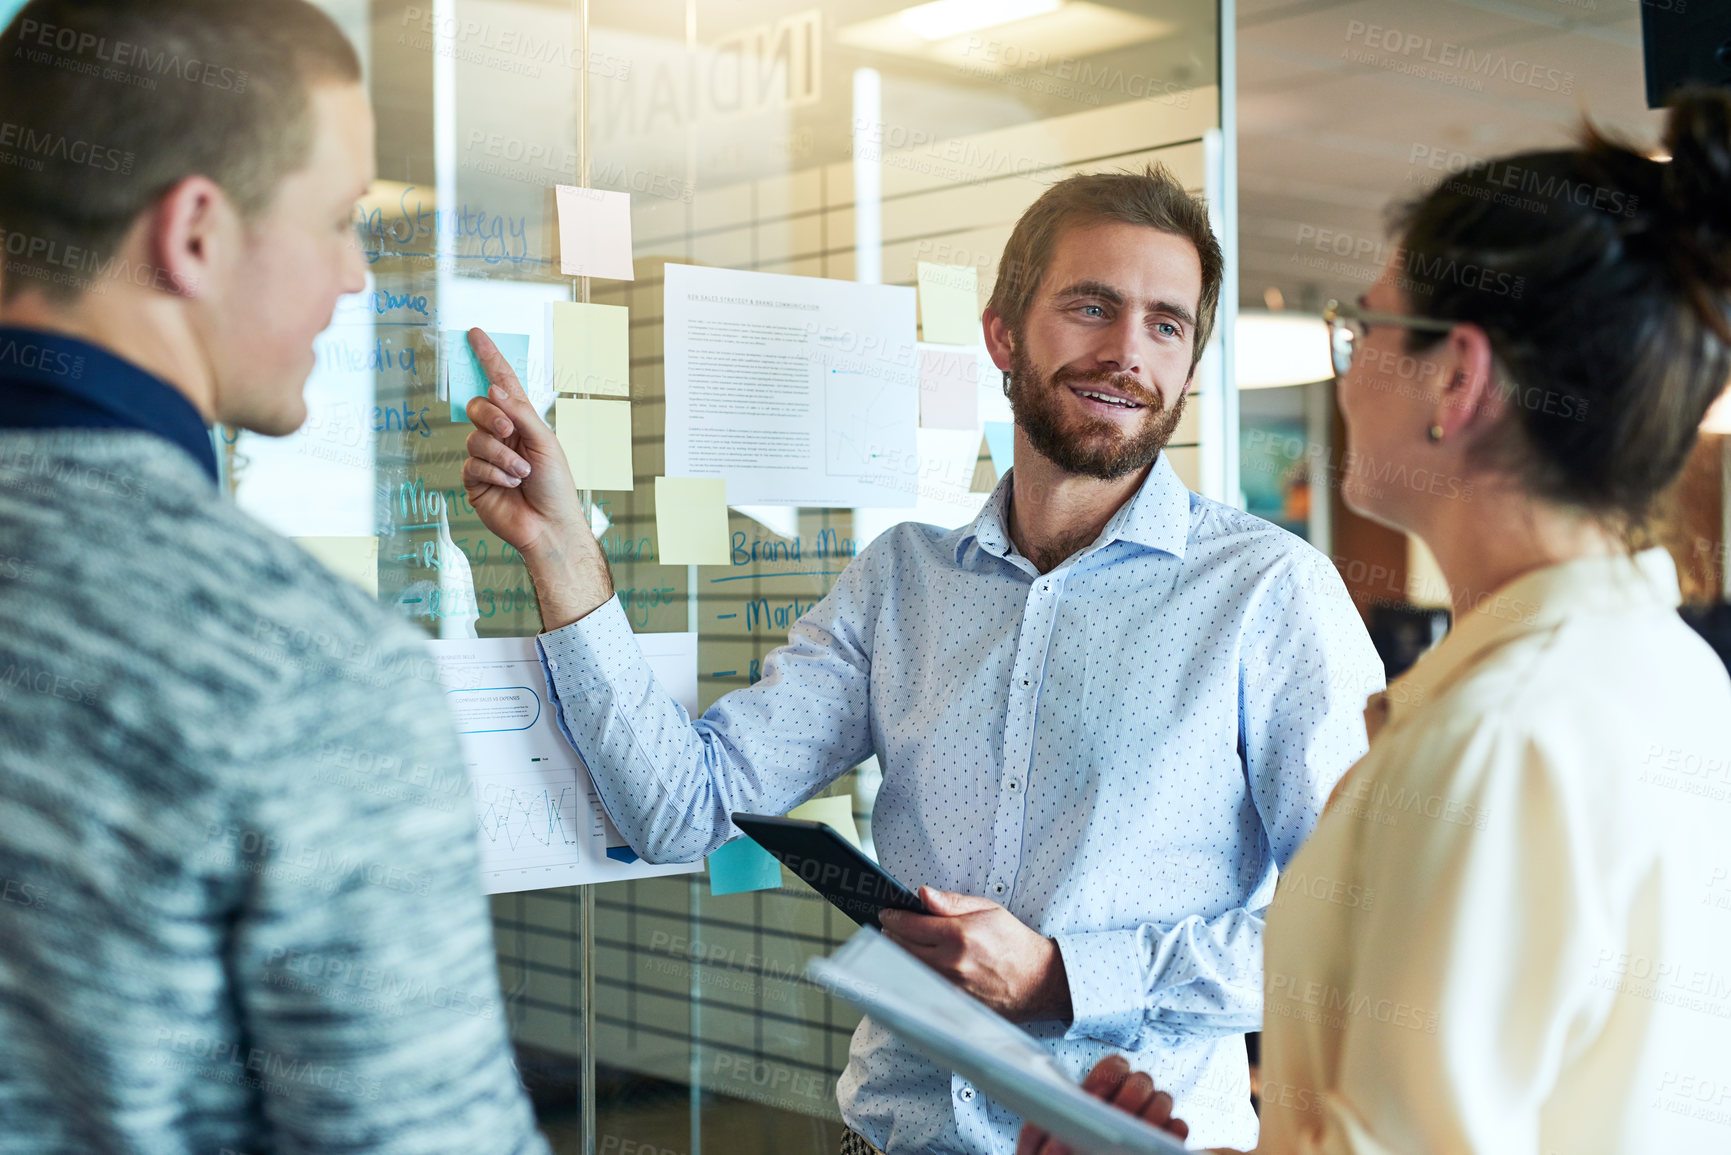 Buy stock photo Shot of a group of businesspeople brainstorming with notes on a glass wall in an office